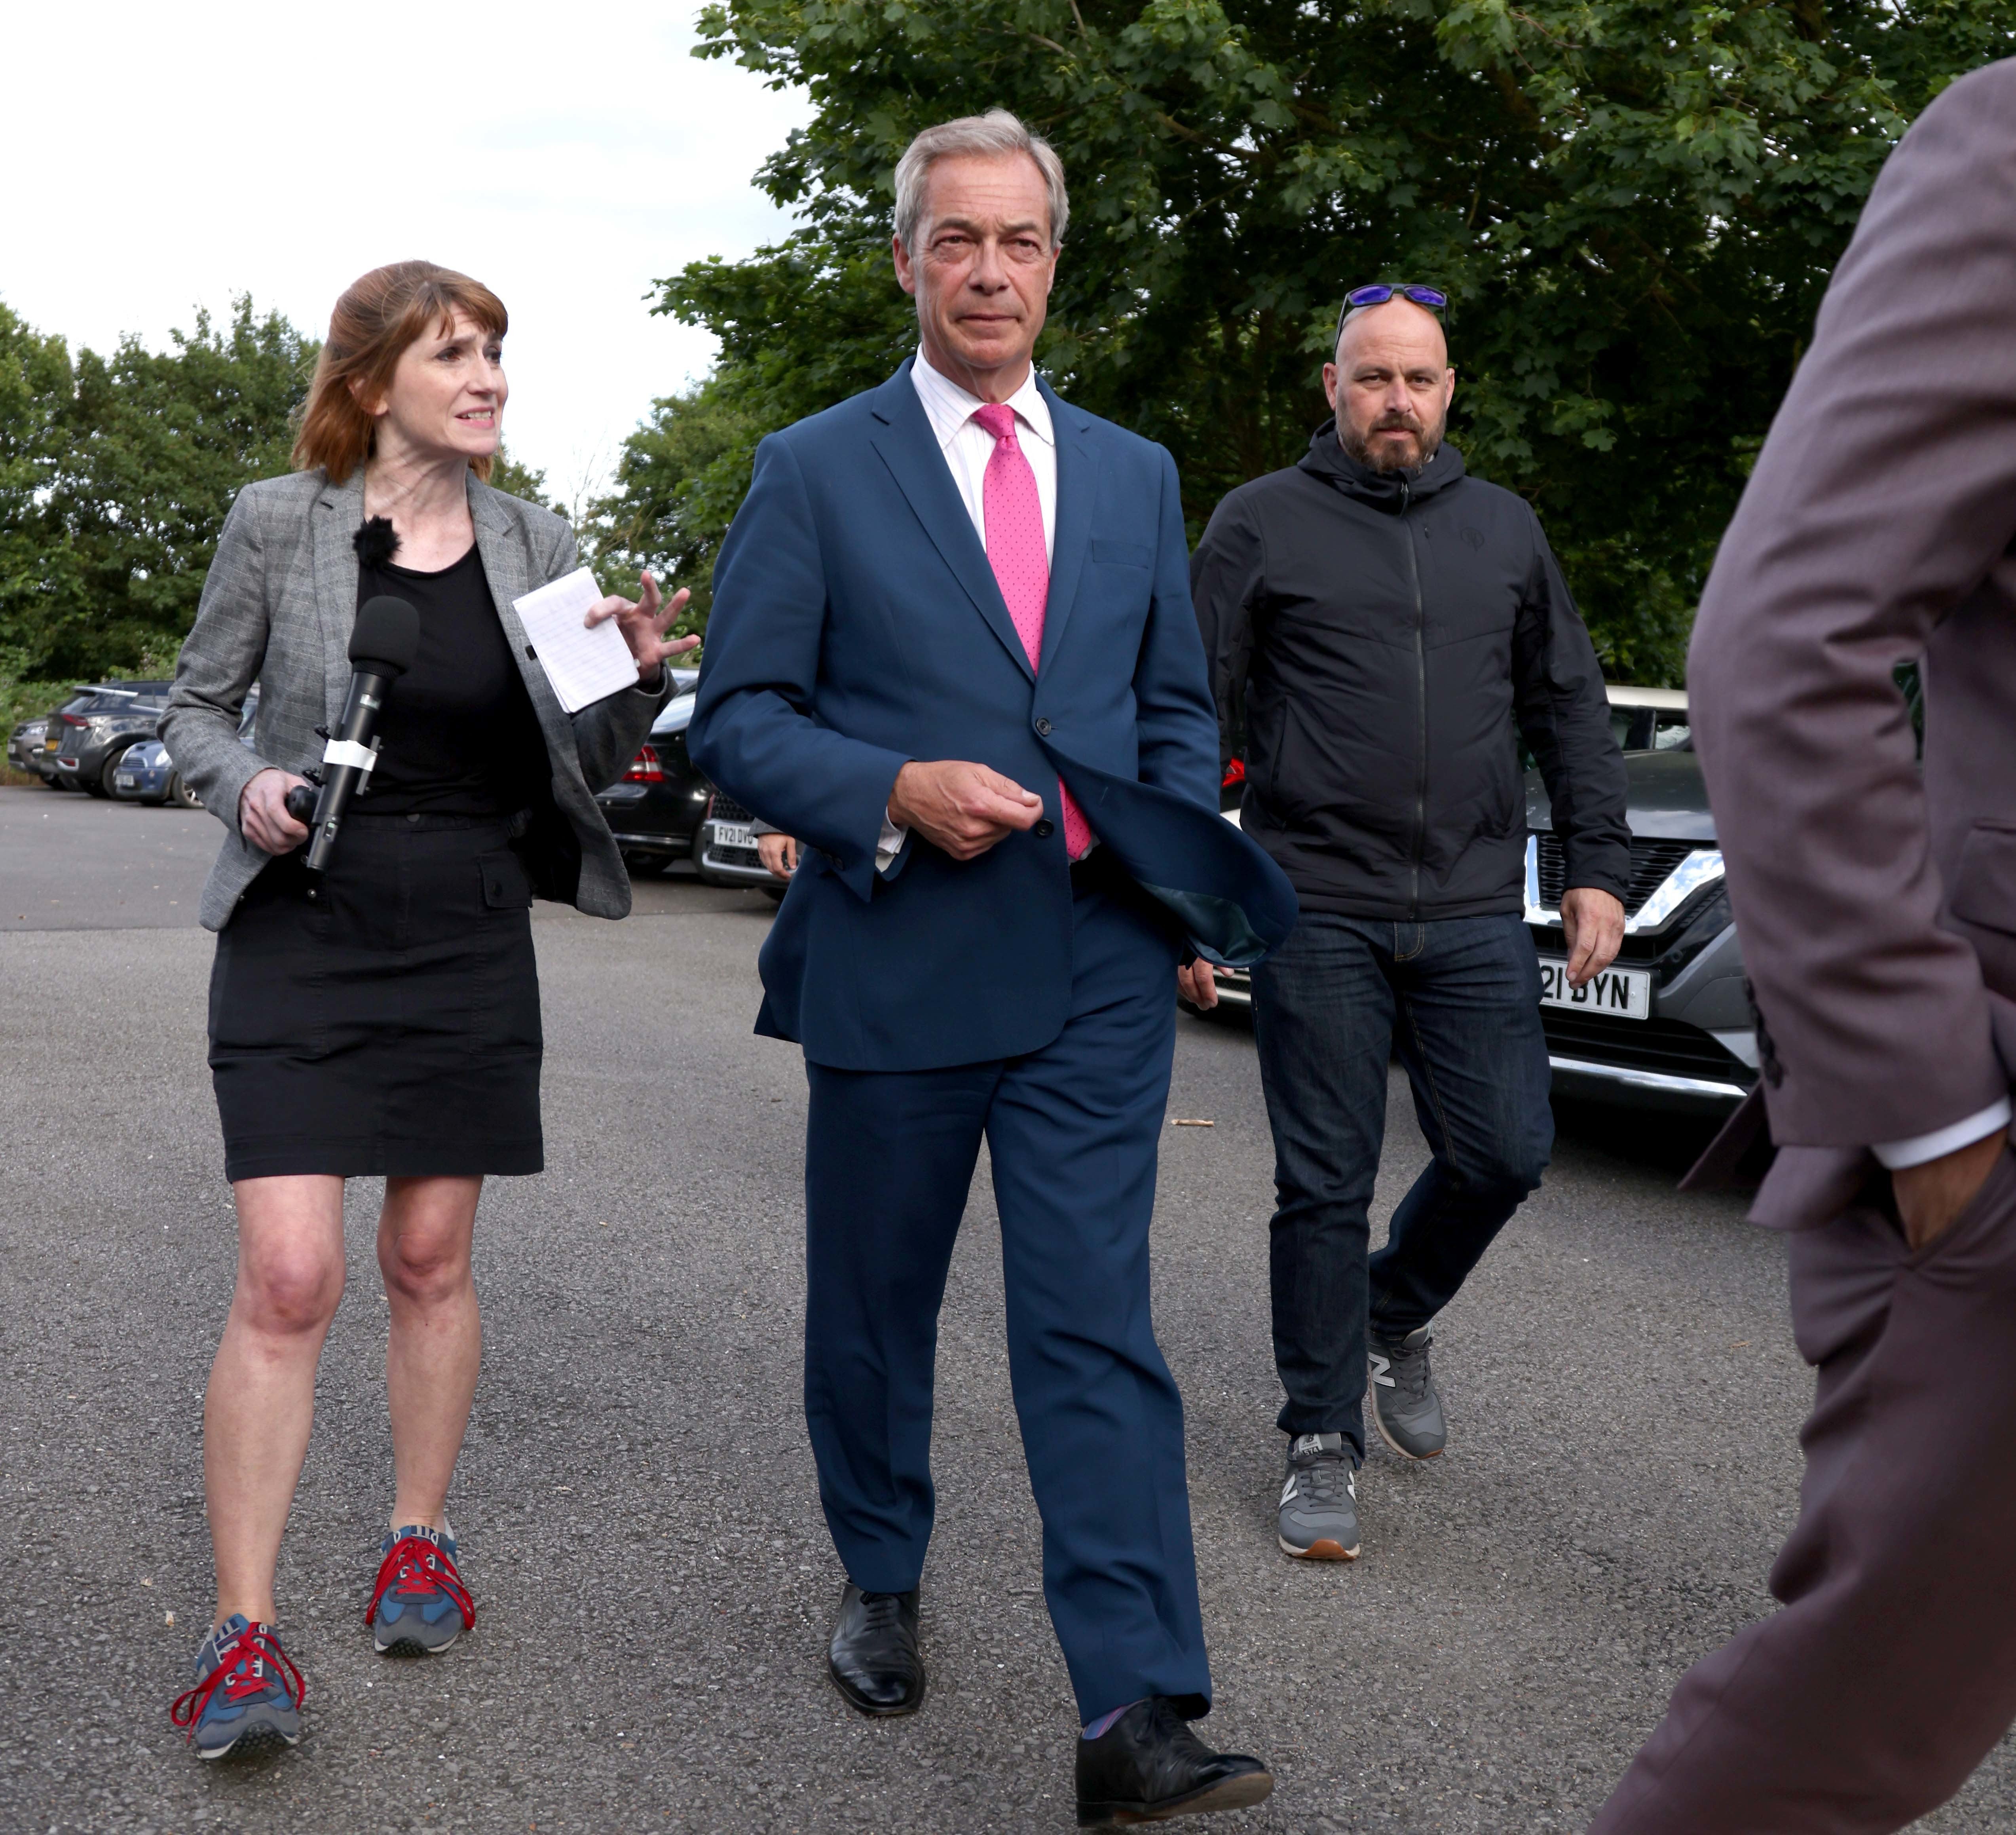 Reform UK Leader Nigel Farage said his party was a ‘start-up’ (Paul Marriott/PA)